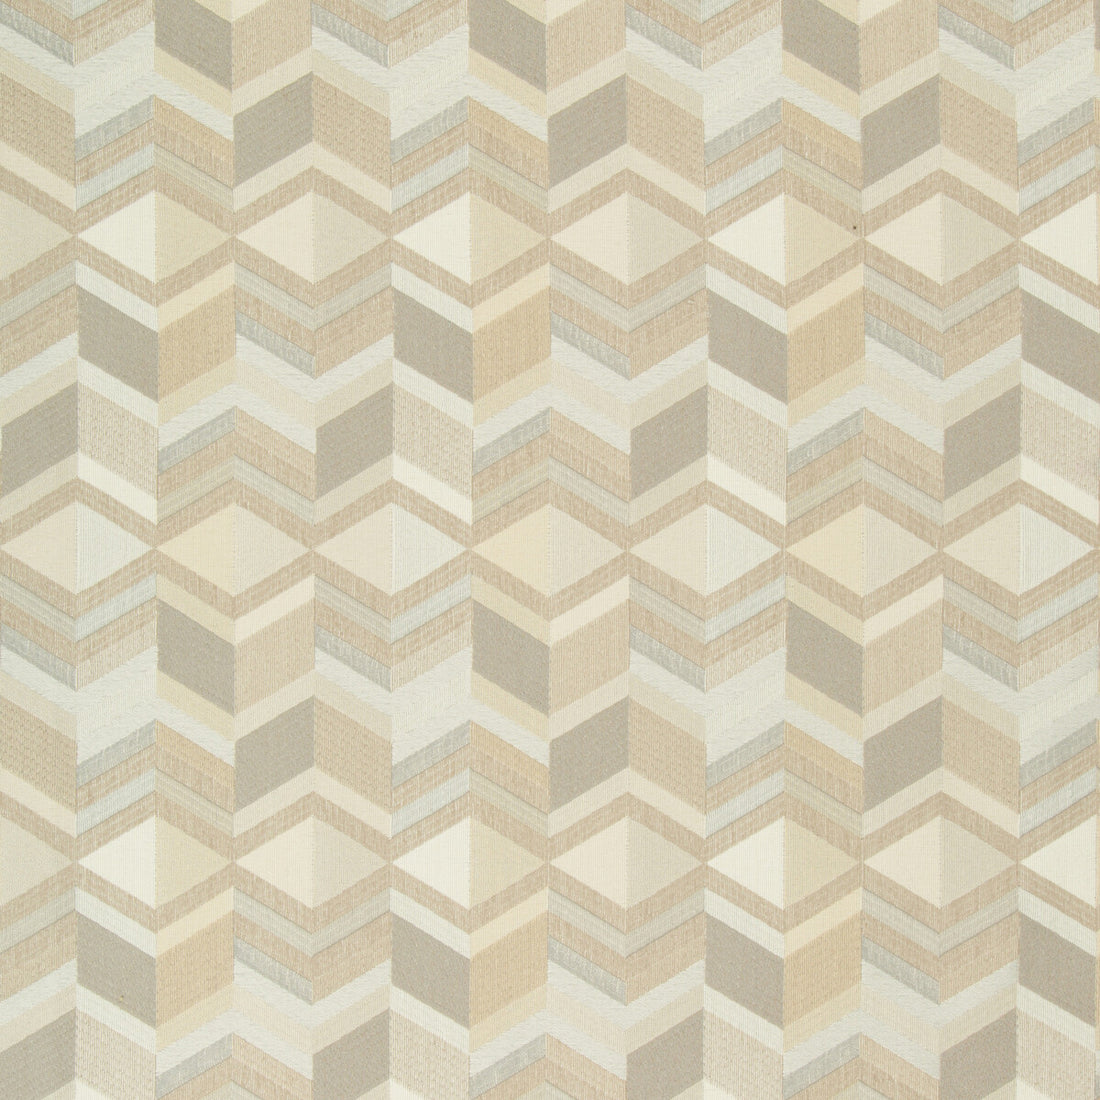 Kravet Contract fabric in 35051-1616 color - pattern 35051.1616.0 - by Kravet Contract in the Incase Crypton Gis collection